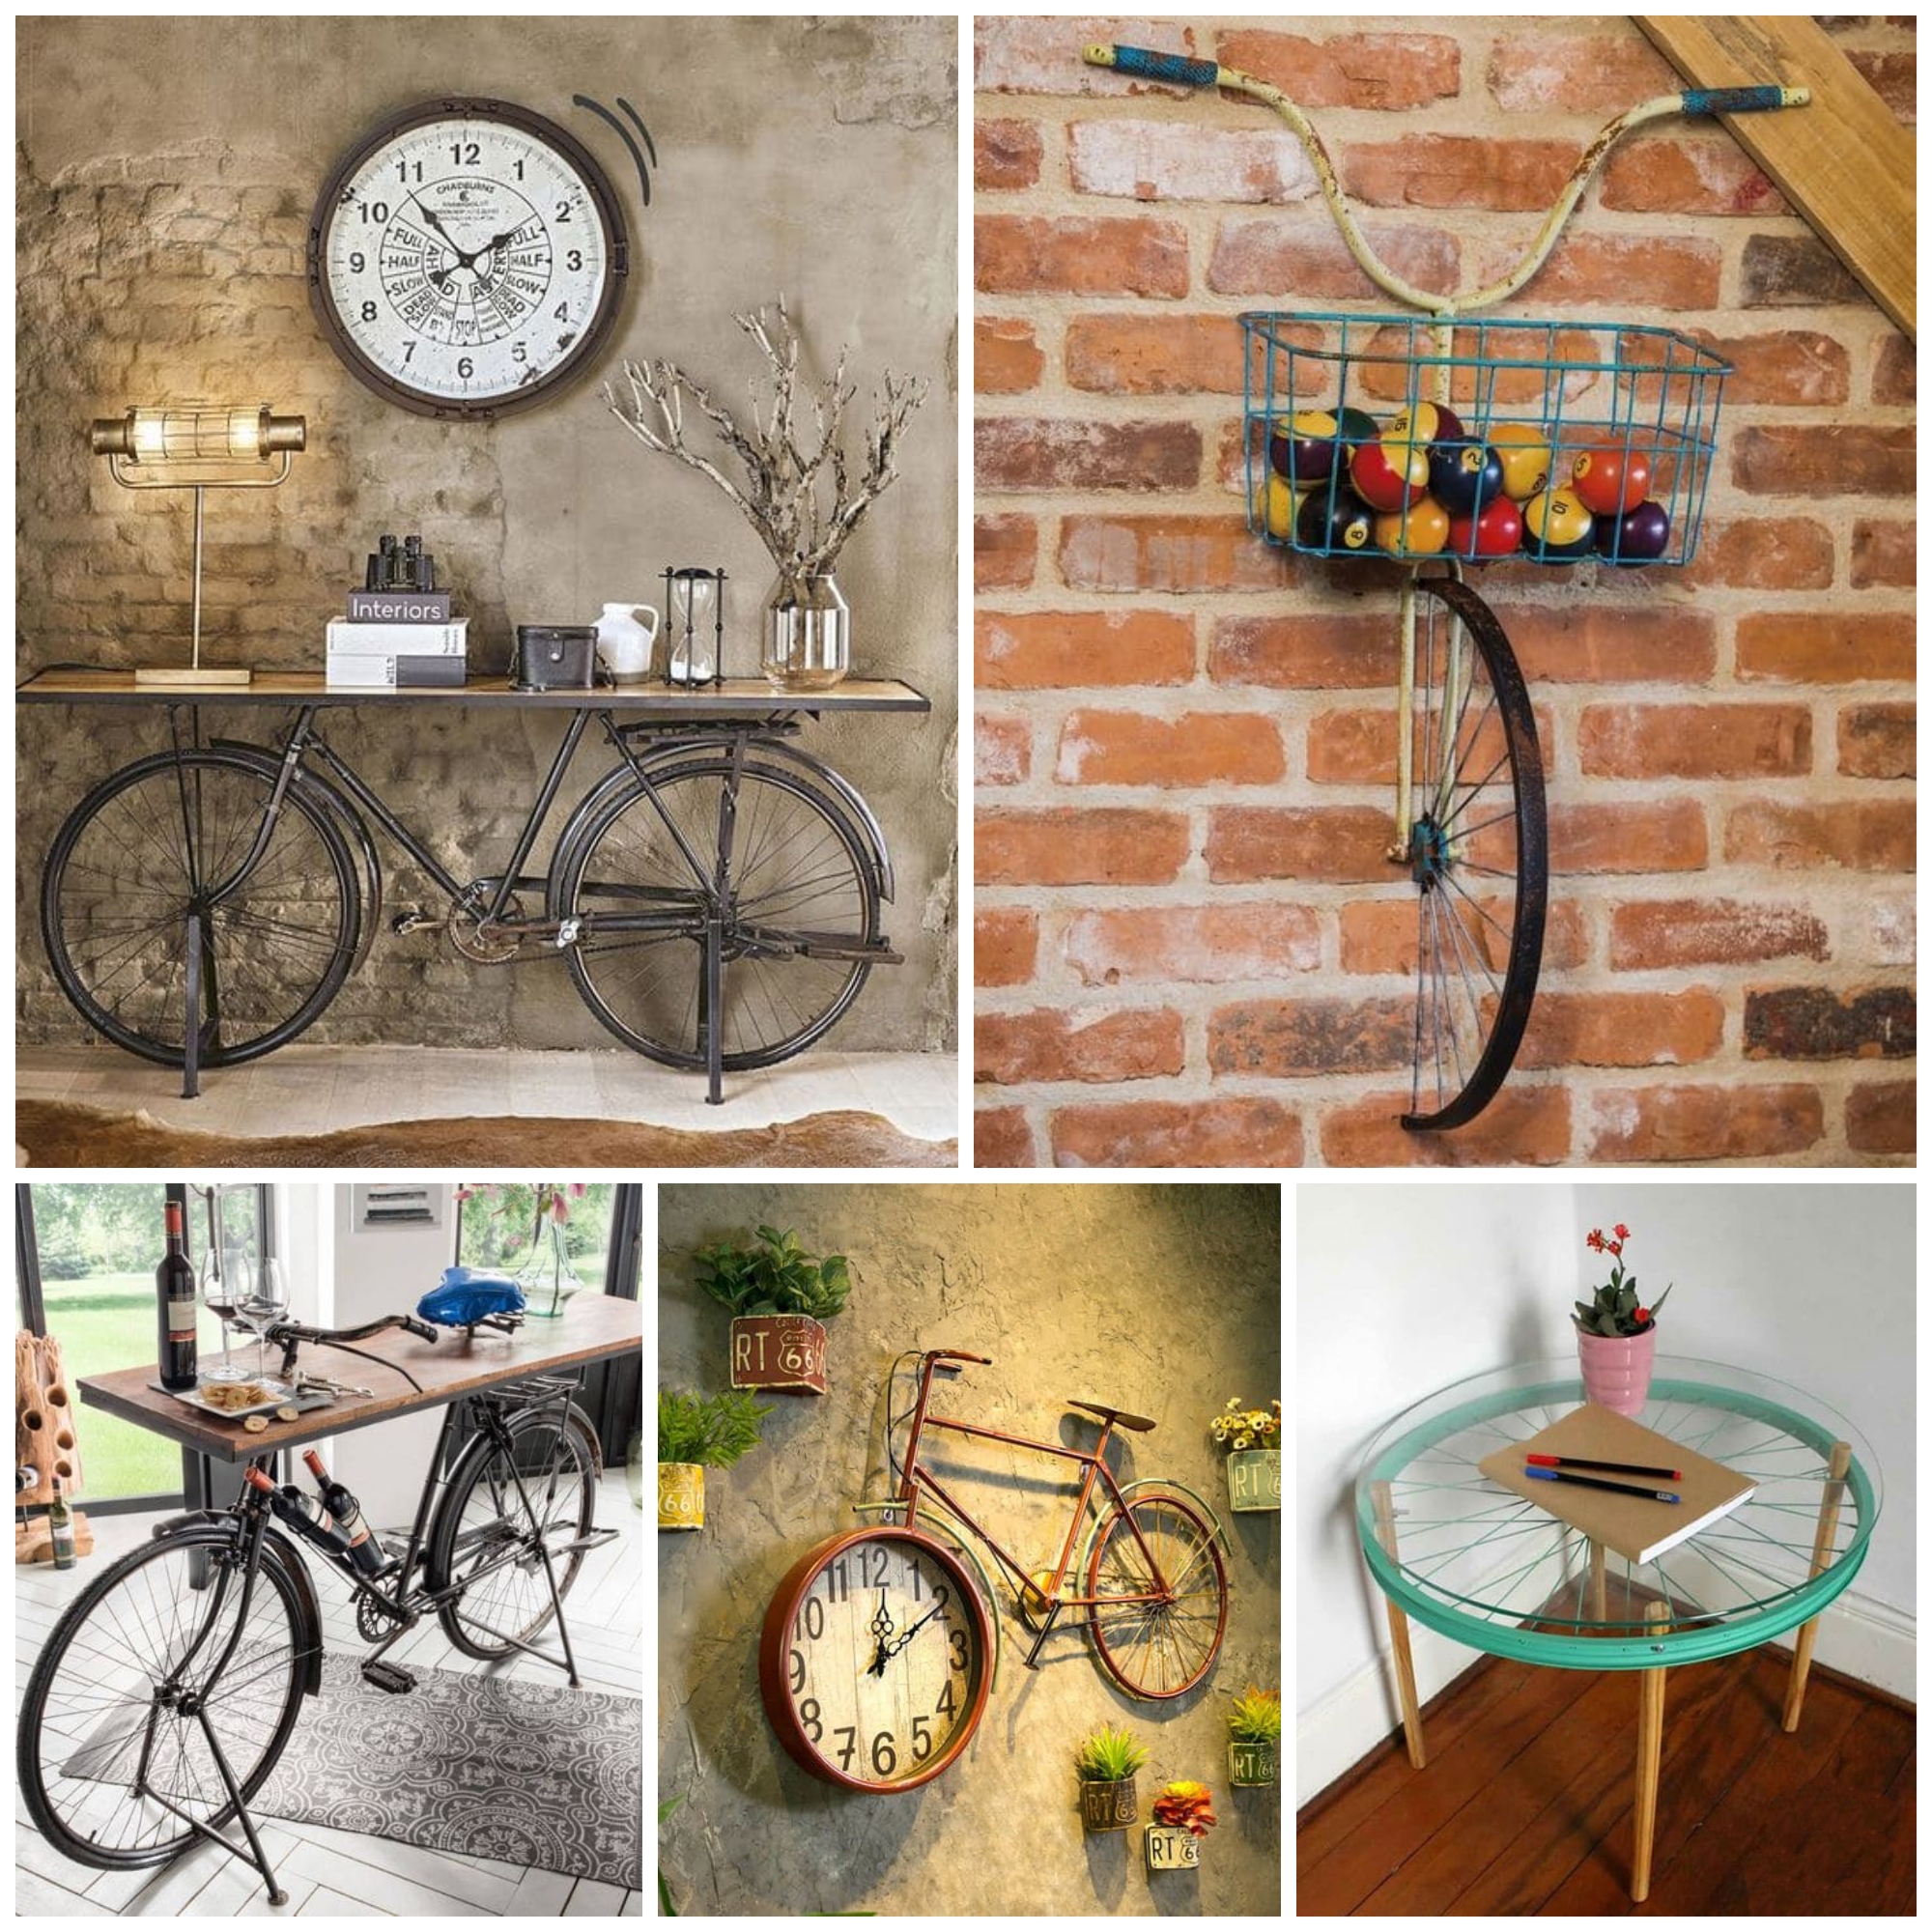 Brilliant Projects To Reuse Old Bicycles In Decorating Home